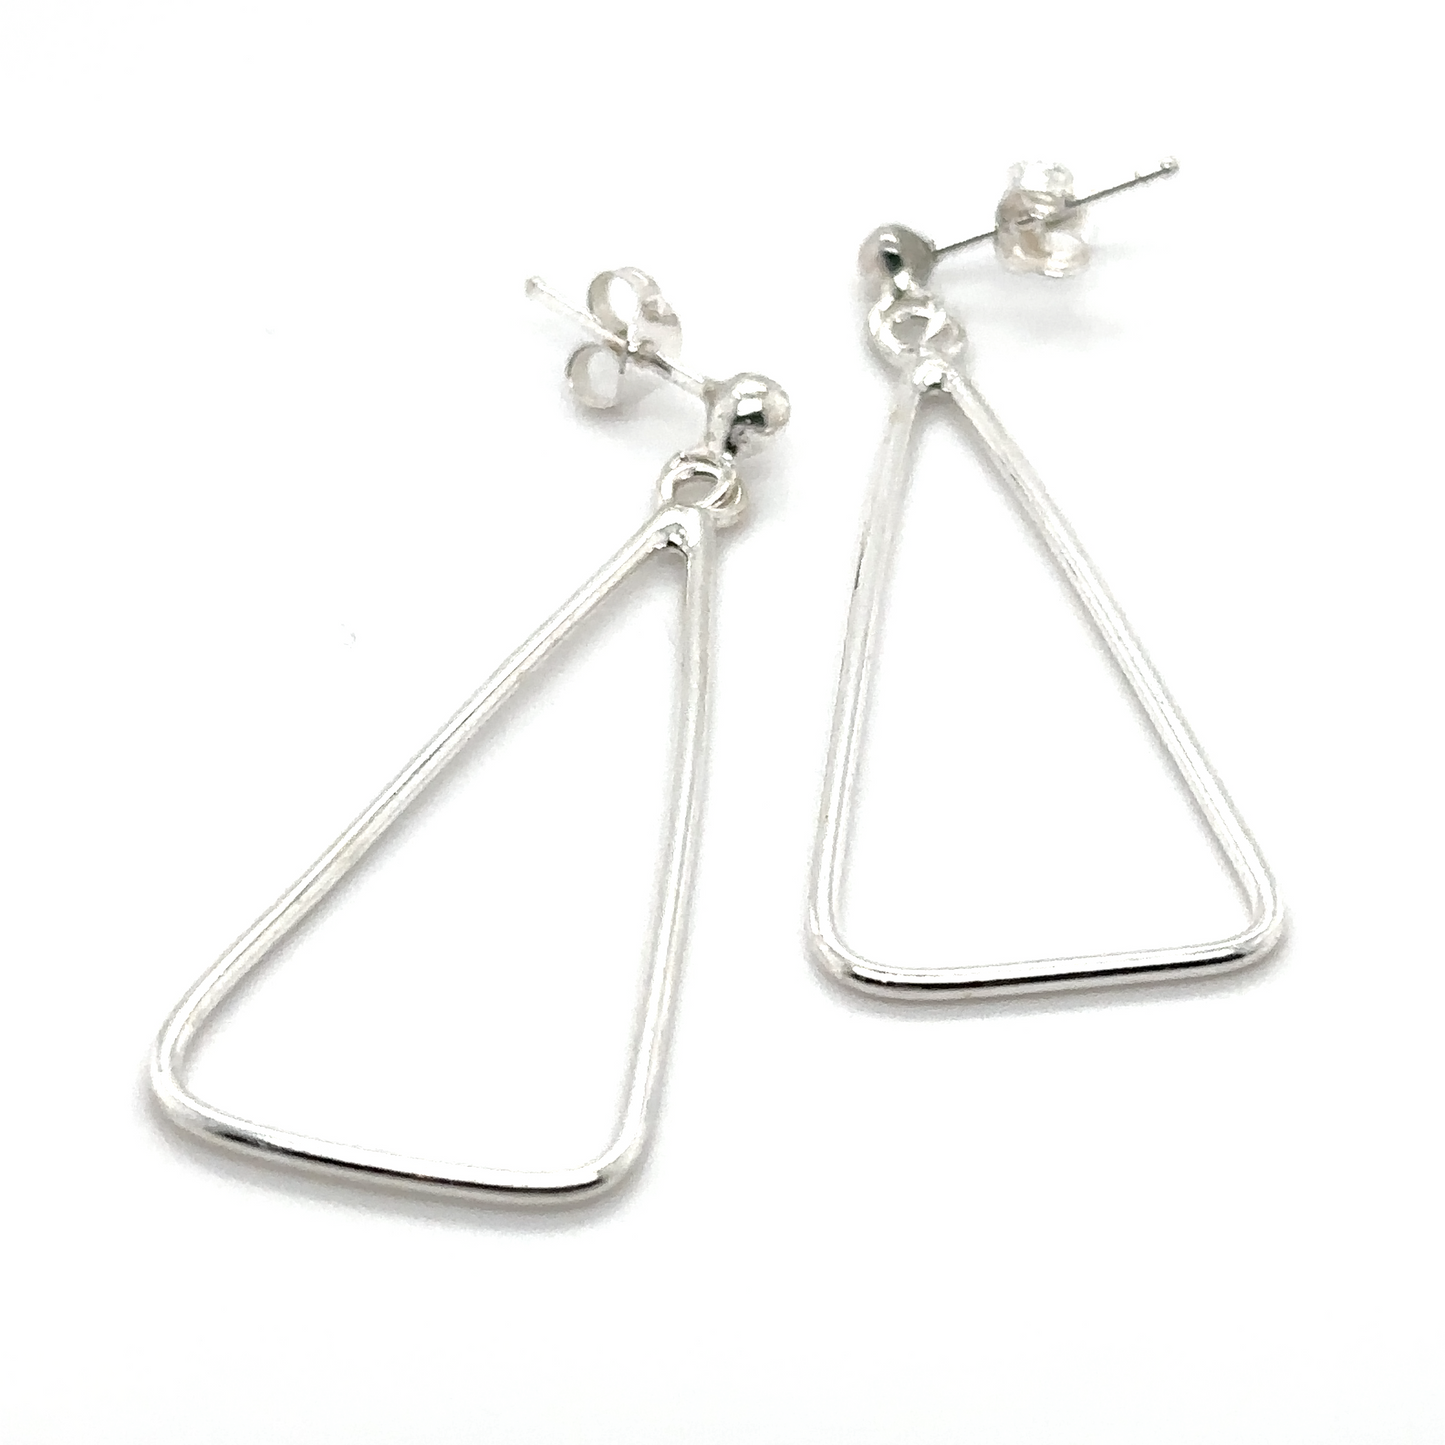 A pair of Super Silver Wire Triangle Earrings on a minimalist white background.